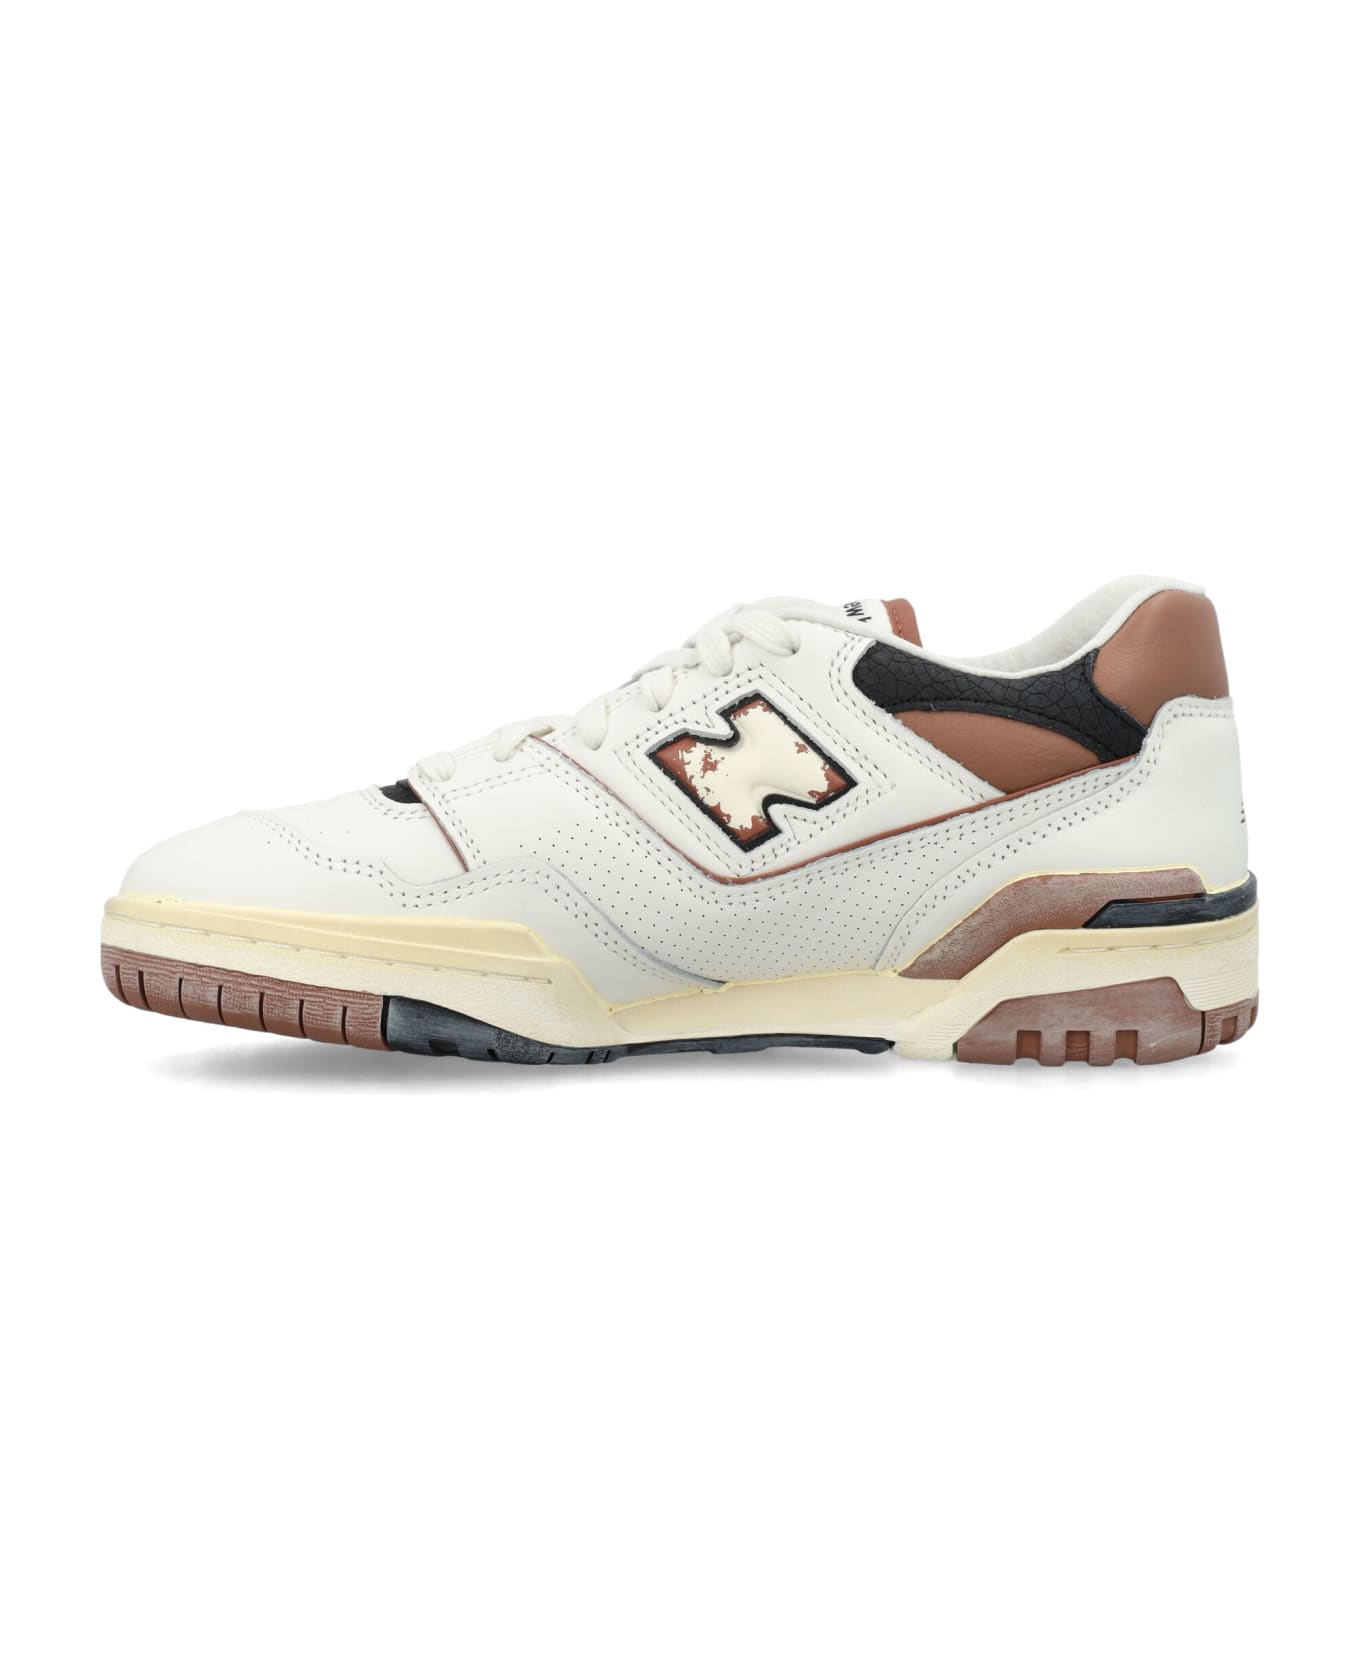 New Balance 550 Sneakers - WHITE BEIGE